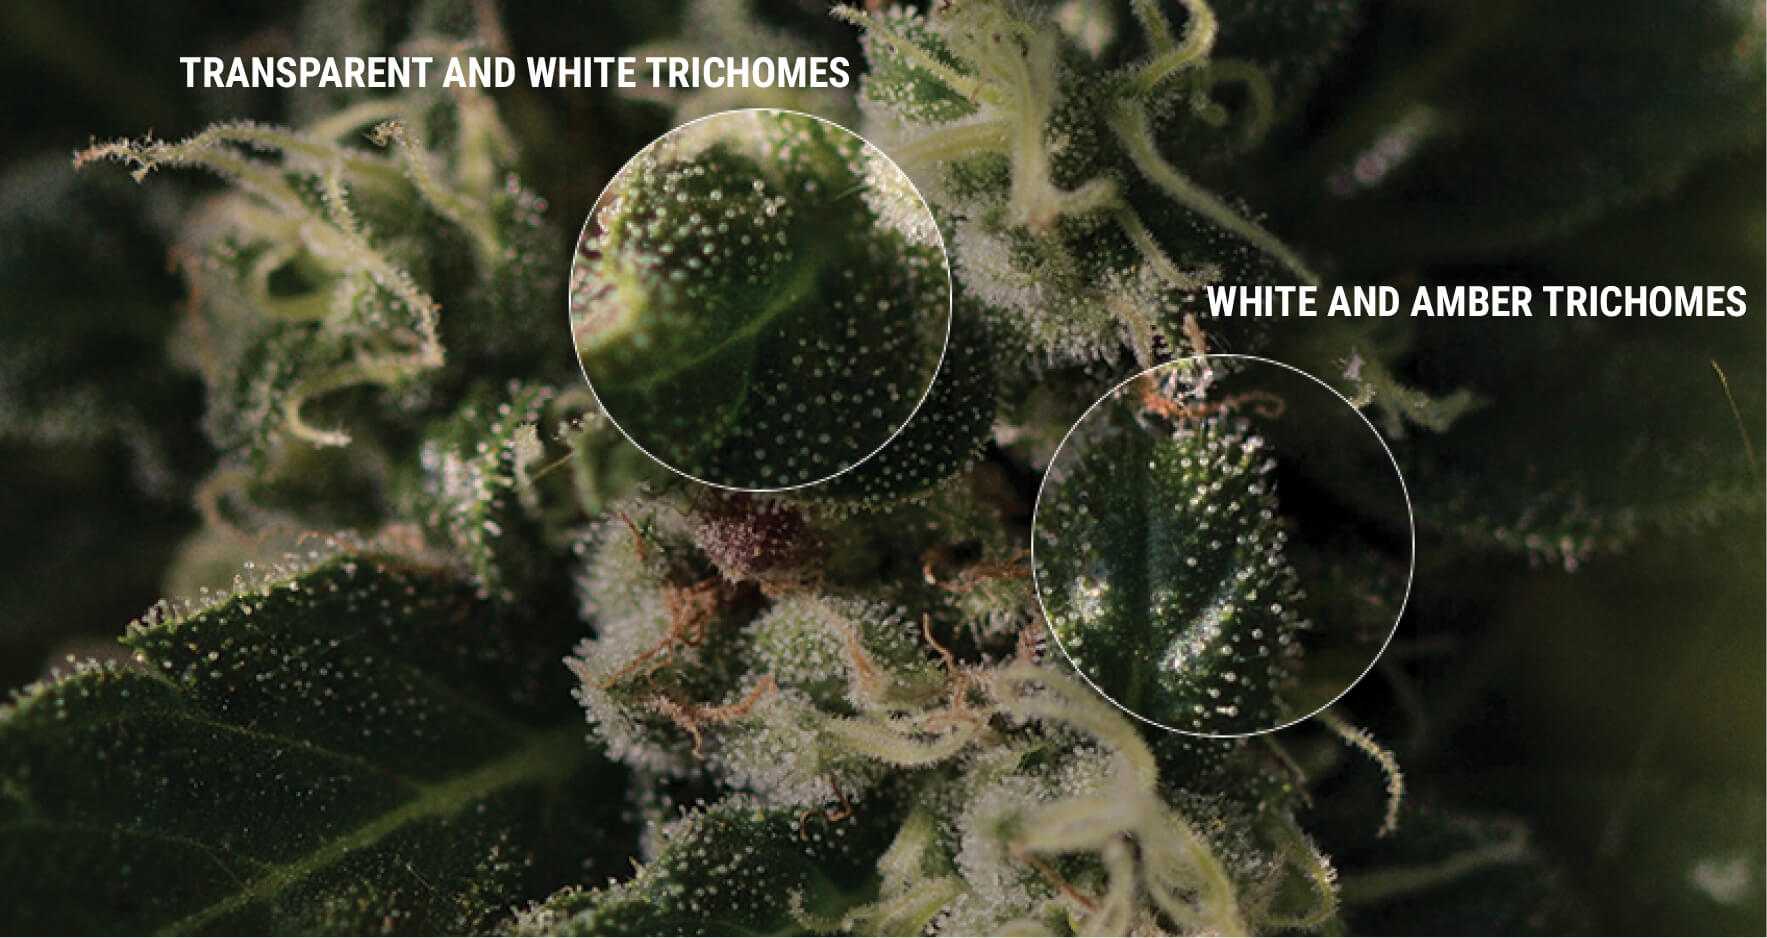 HOW TO INSPECT YOUR TRICHOMES